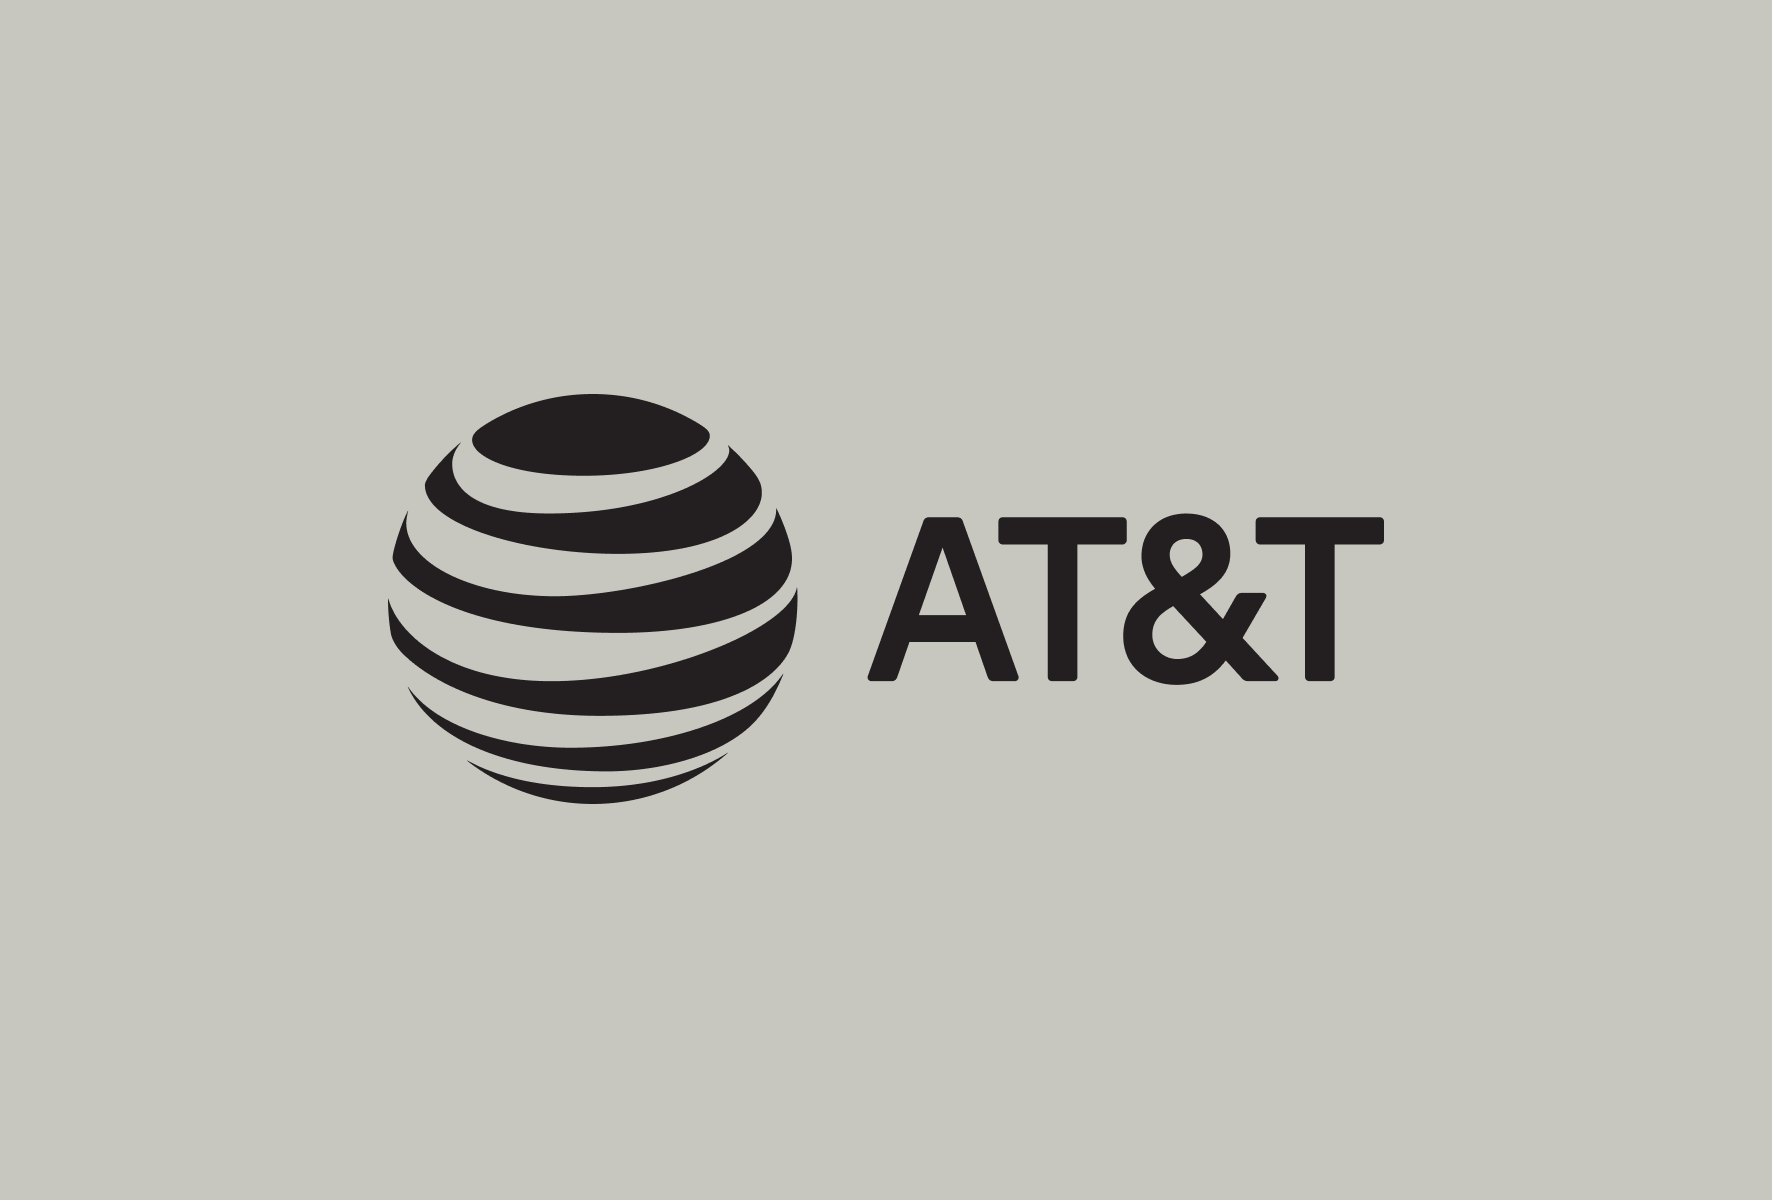 Famous logos: part III - AT&T